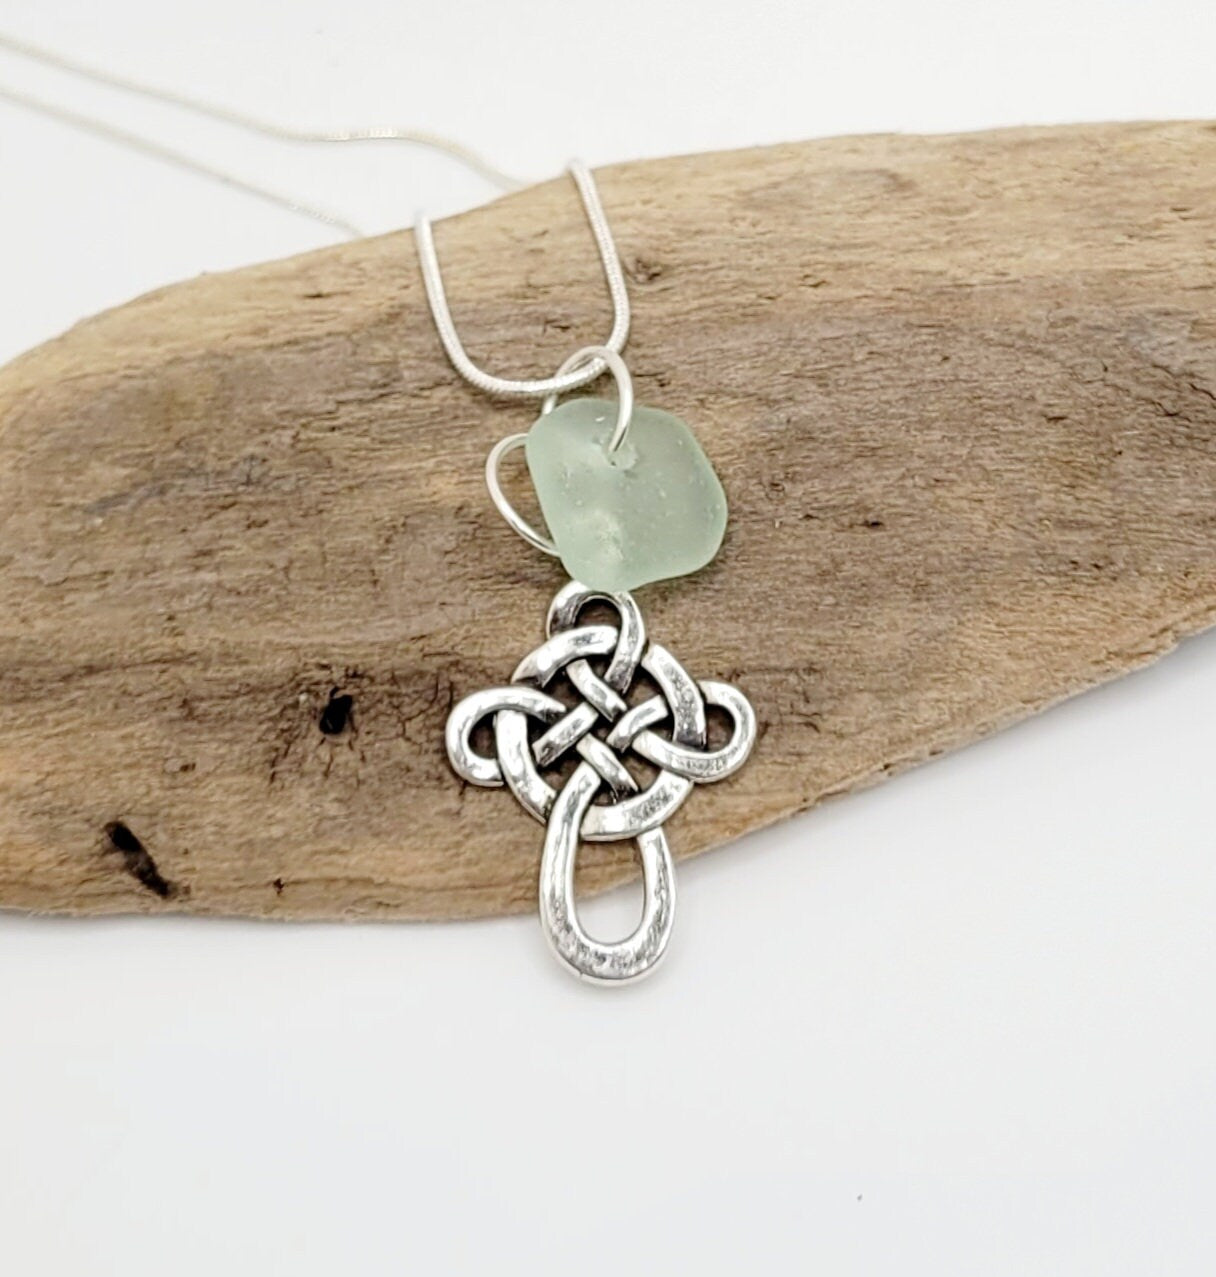 Sea Glass Necklace/St. Patrick's Day Necklace/Celtic Cross Necklace/Genuine Sea Glass/Irish Necklace/GoodMade to Order/148